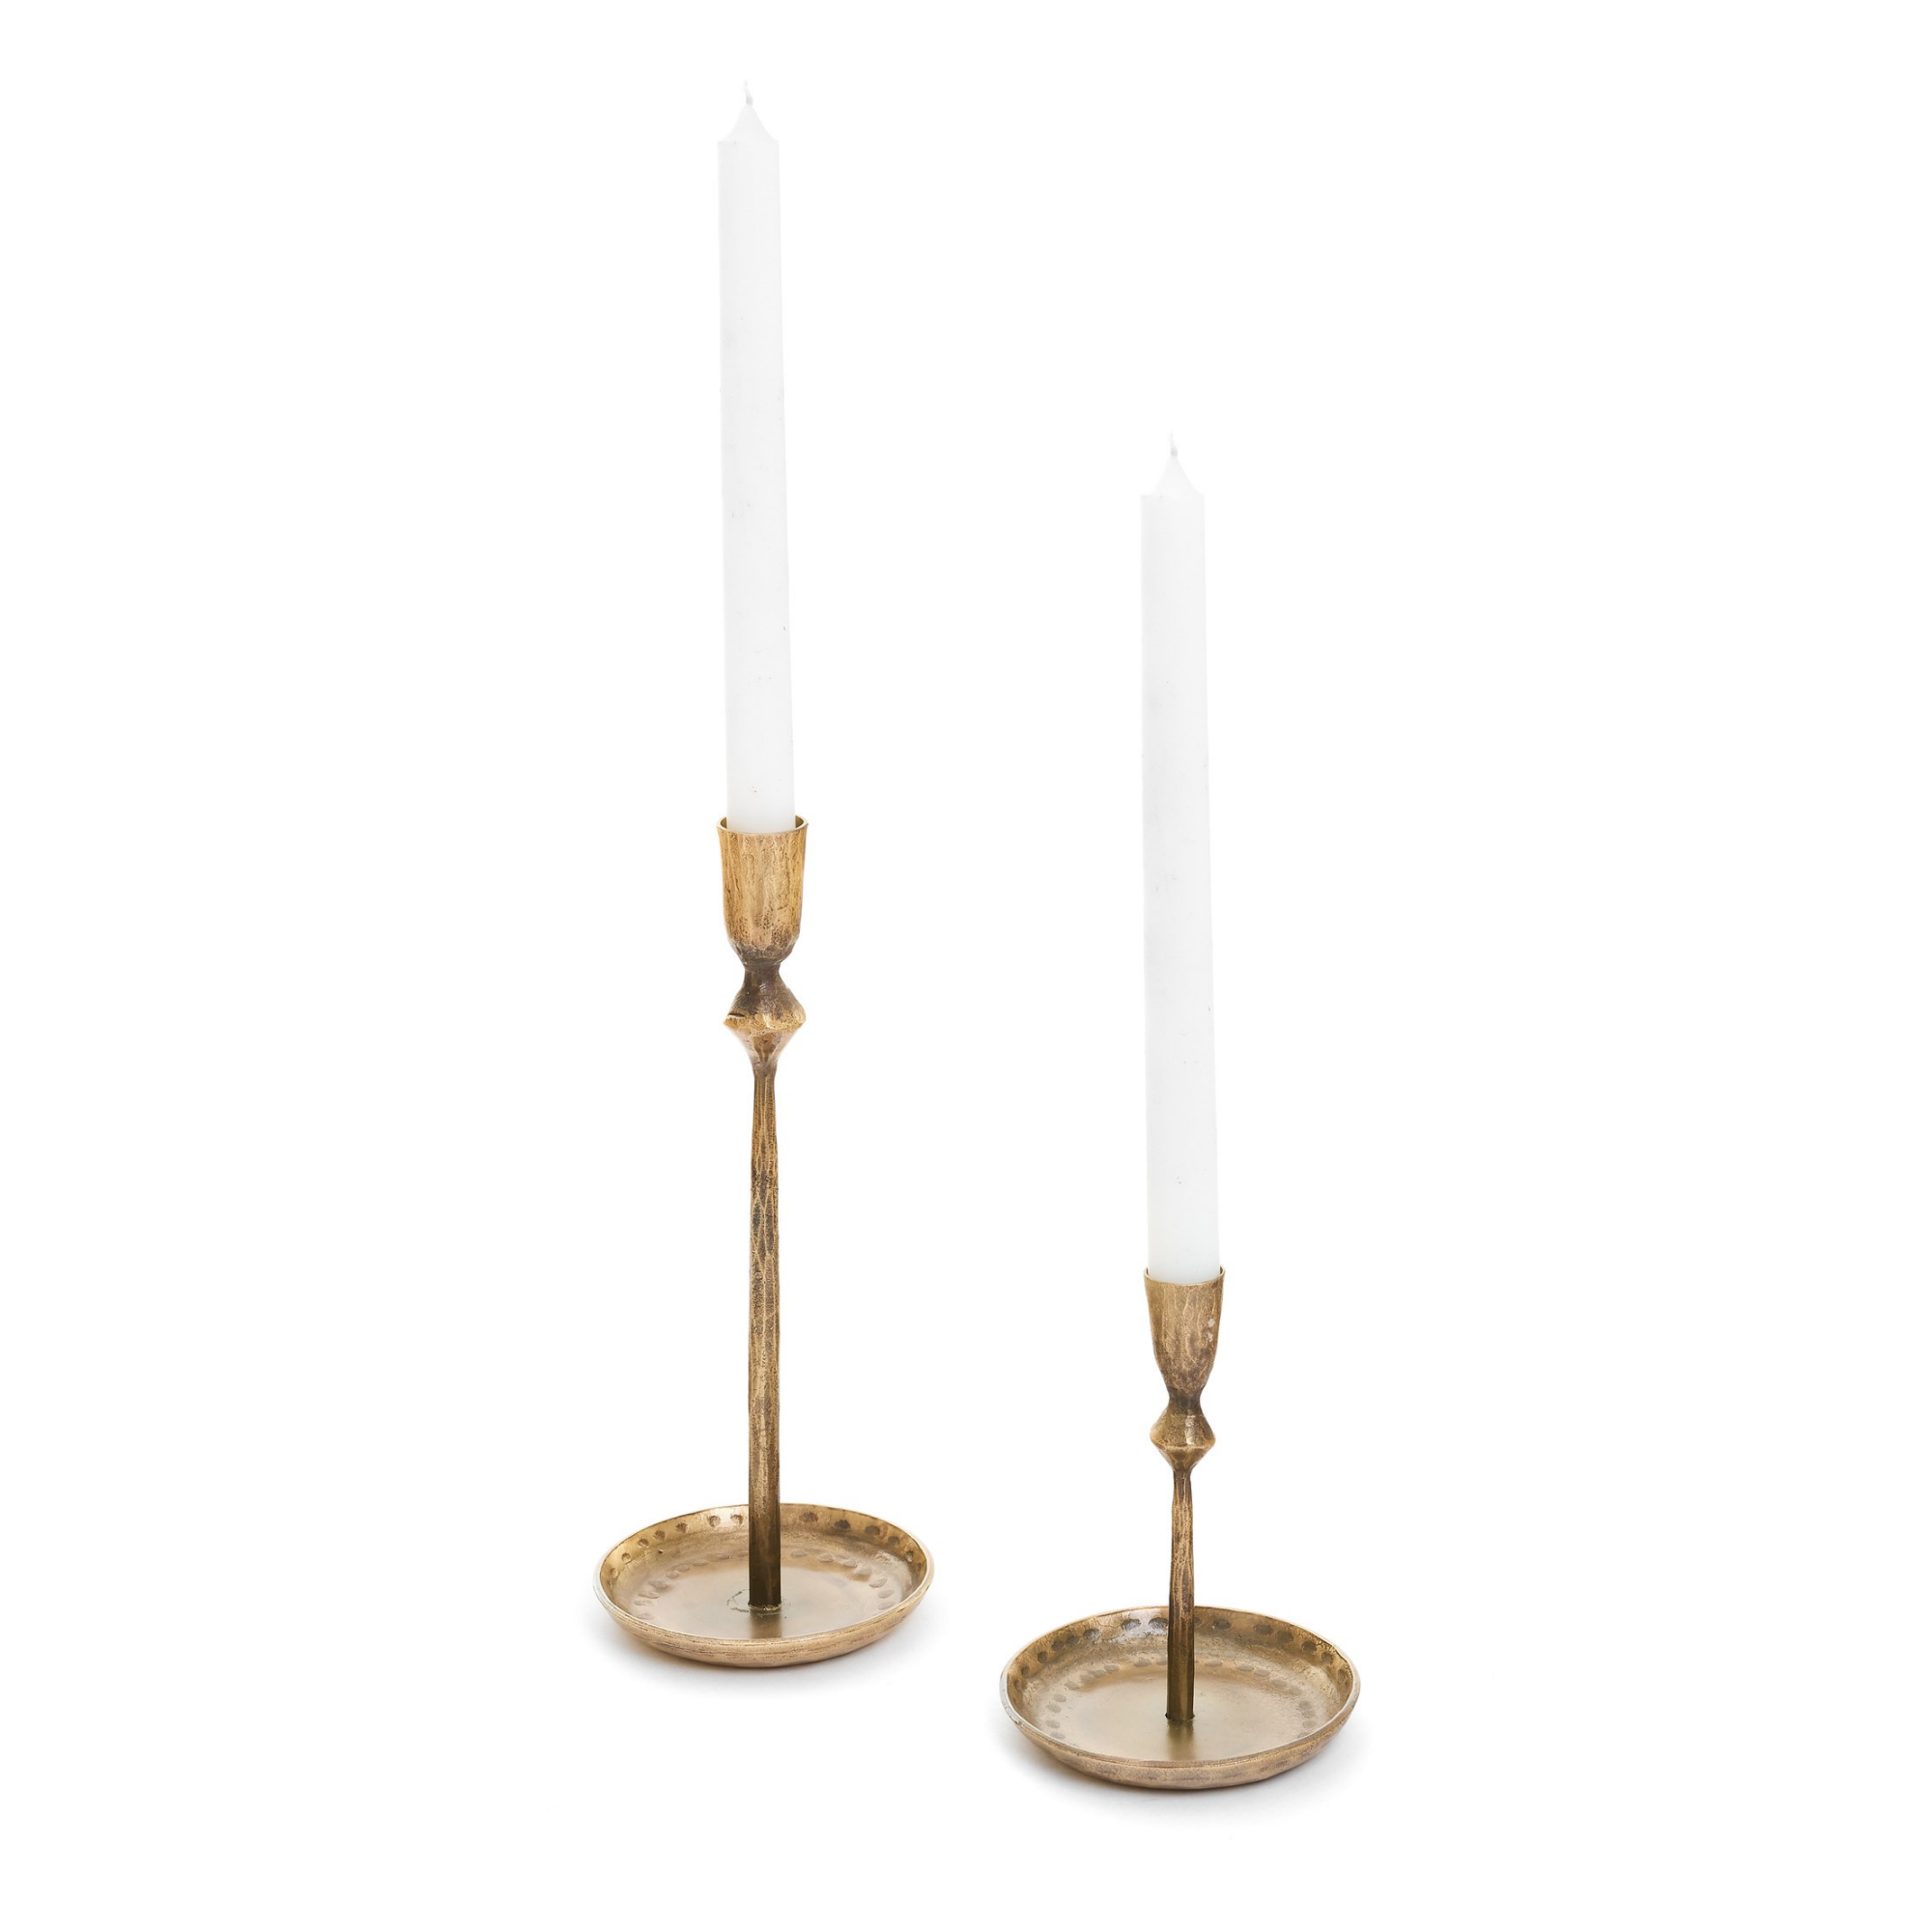 Our Antique Brass Taper Candle Holders - Set of 2 will elevate